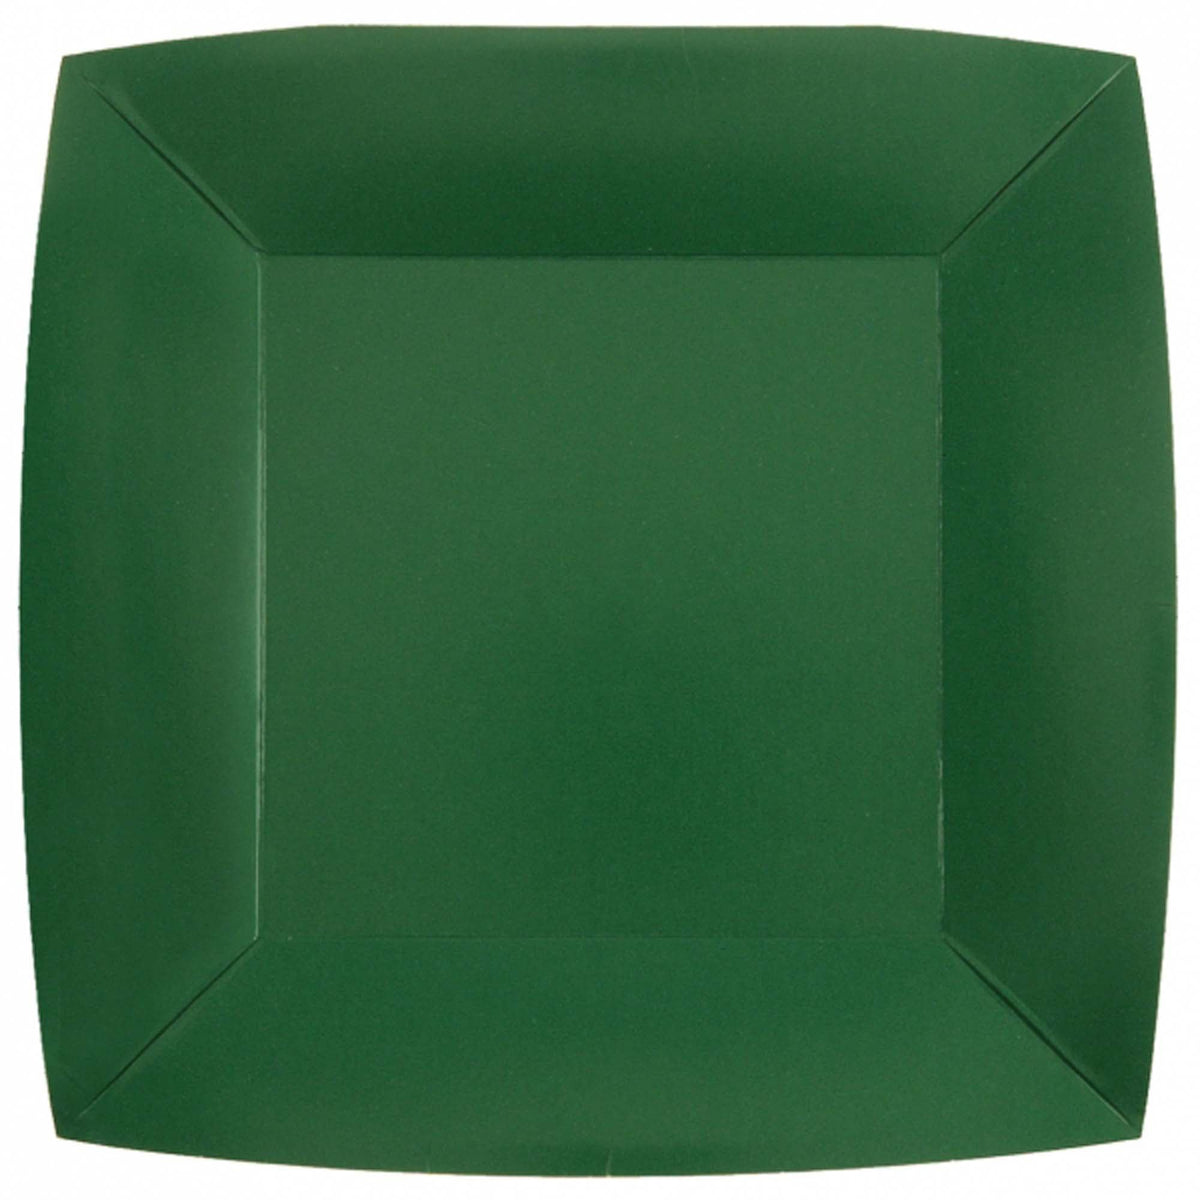 SANTEX Everyday Entertaining Dark Green Large Square Lunch Party Paper Plates, 9 Inches, 10 Count 3660380072355